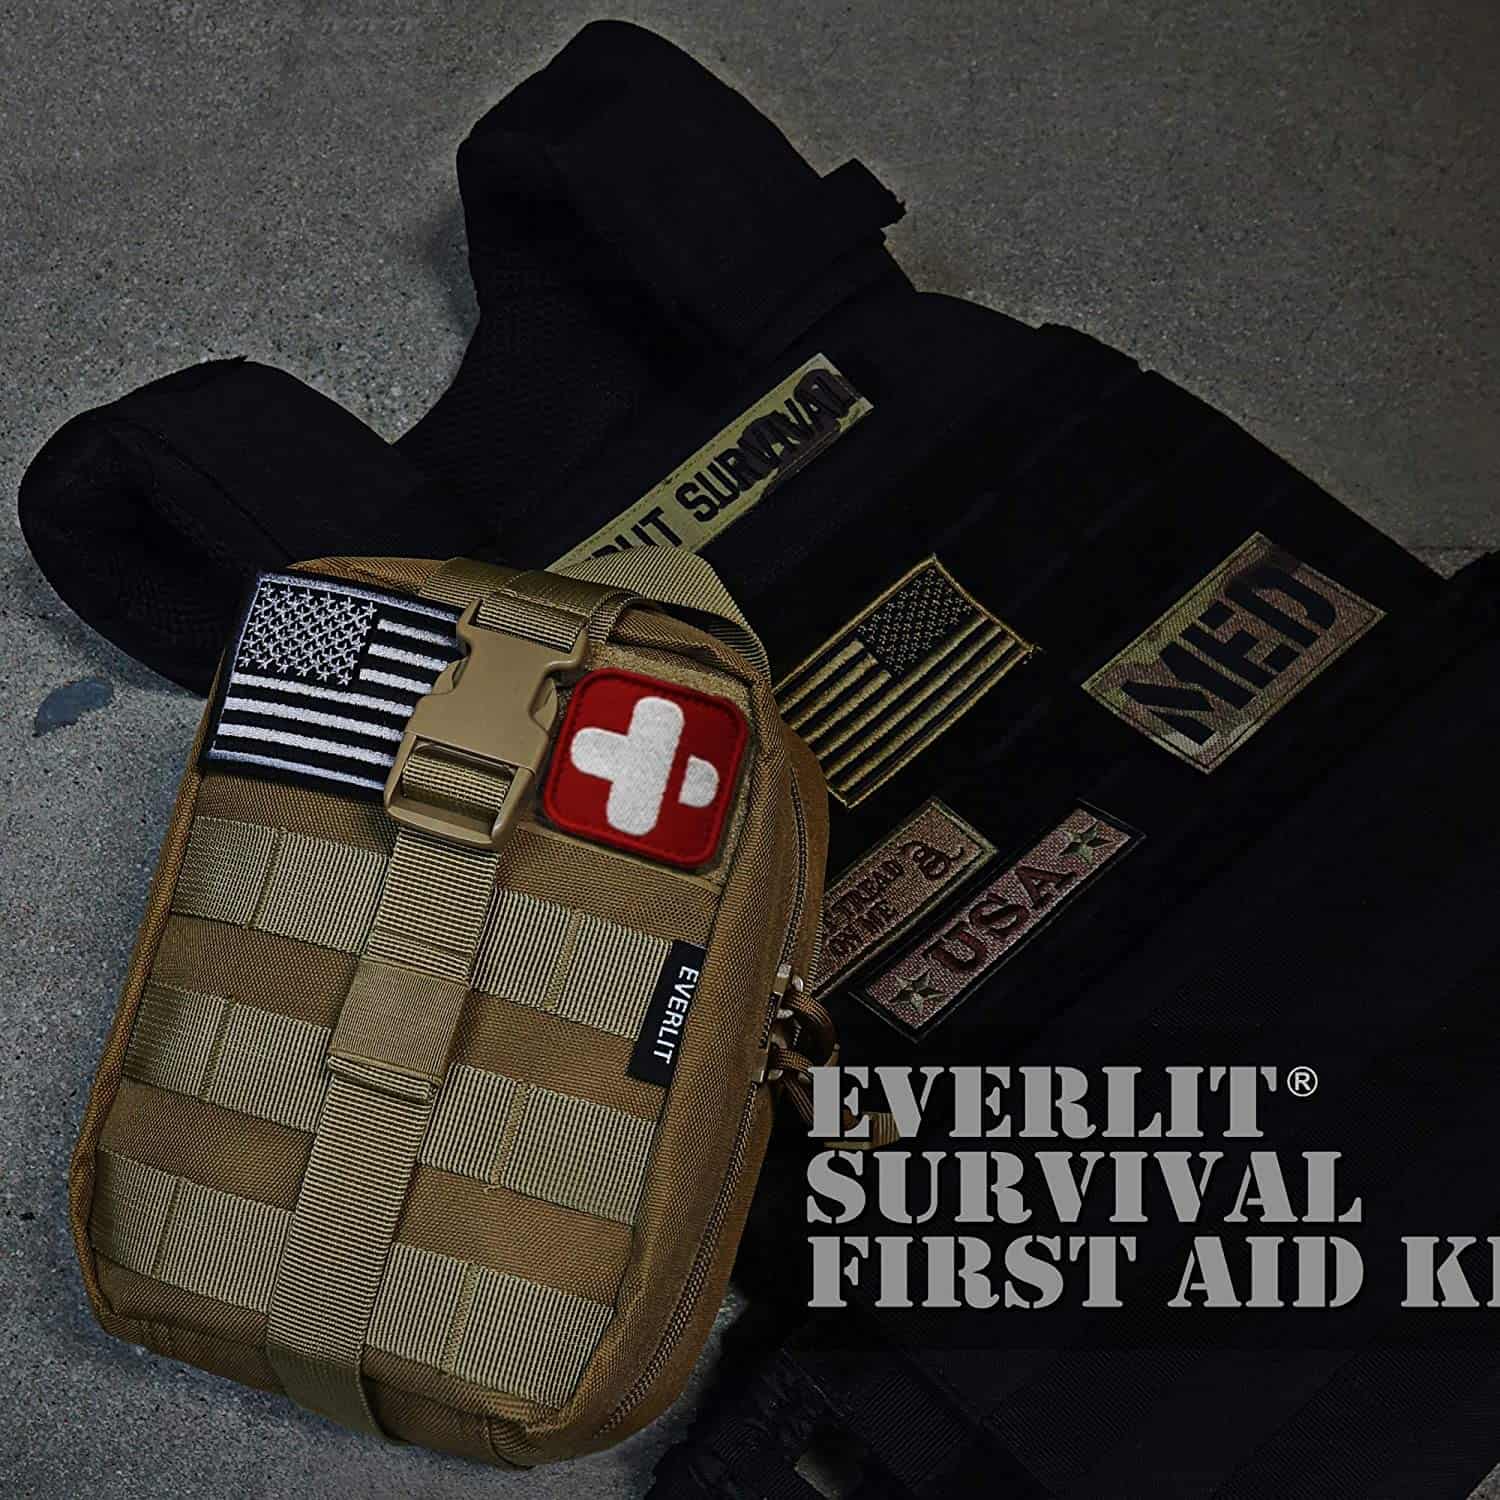 Black Camo Survival First Aid Kit Contains Contains 250 Piece First Aid Kit - 3 